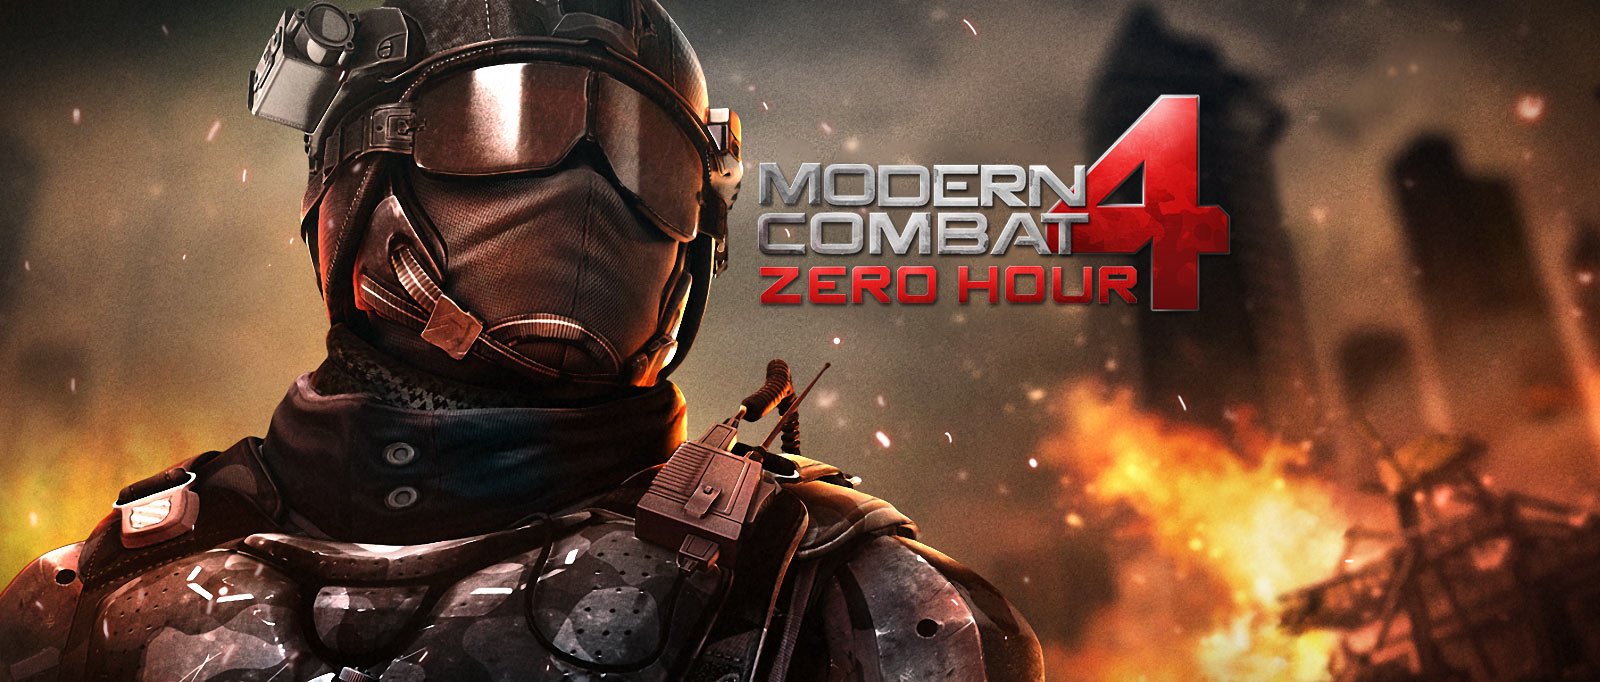 download mc4 for android 7.0